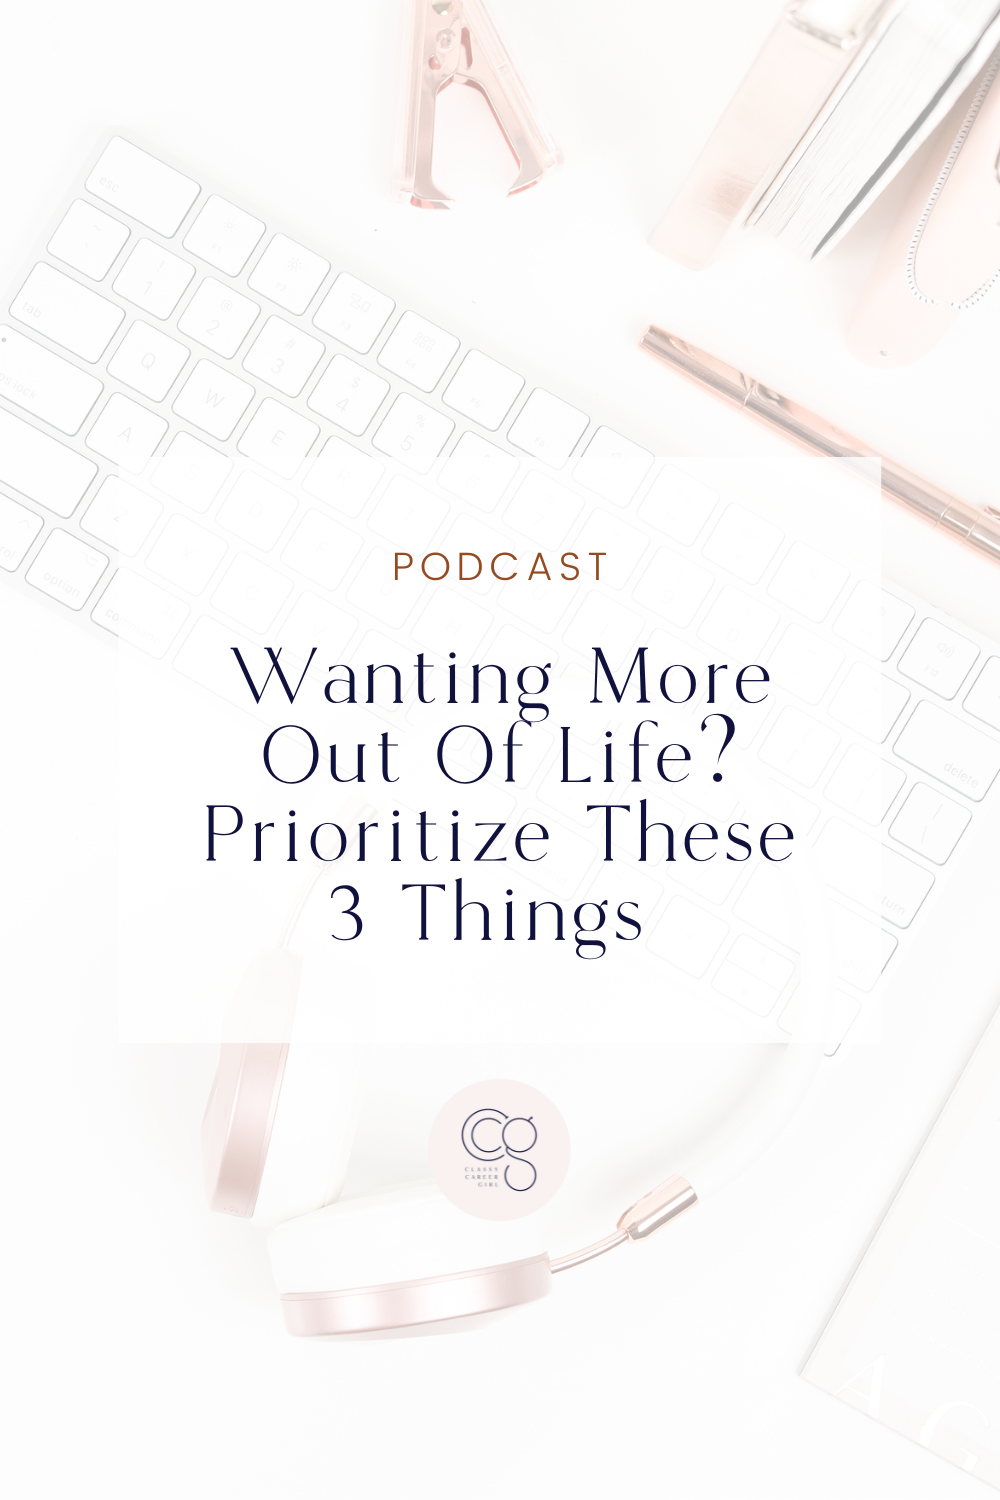 Wanting More Out Of Life? Prioritize These 3 Things